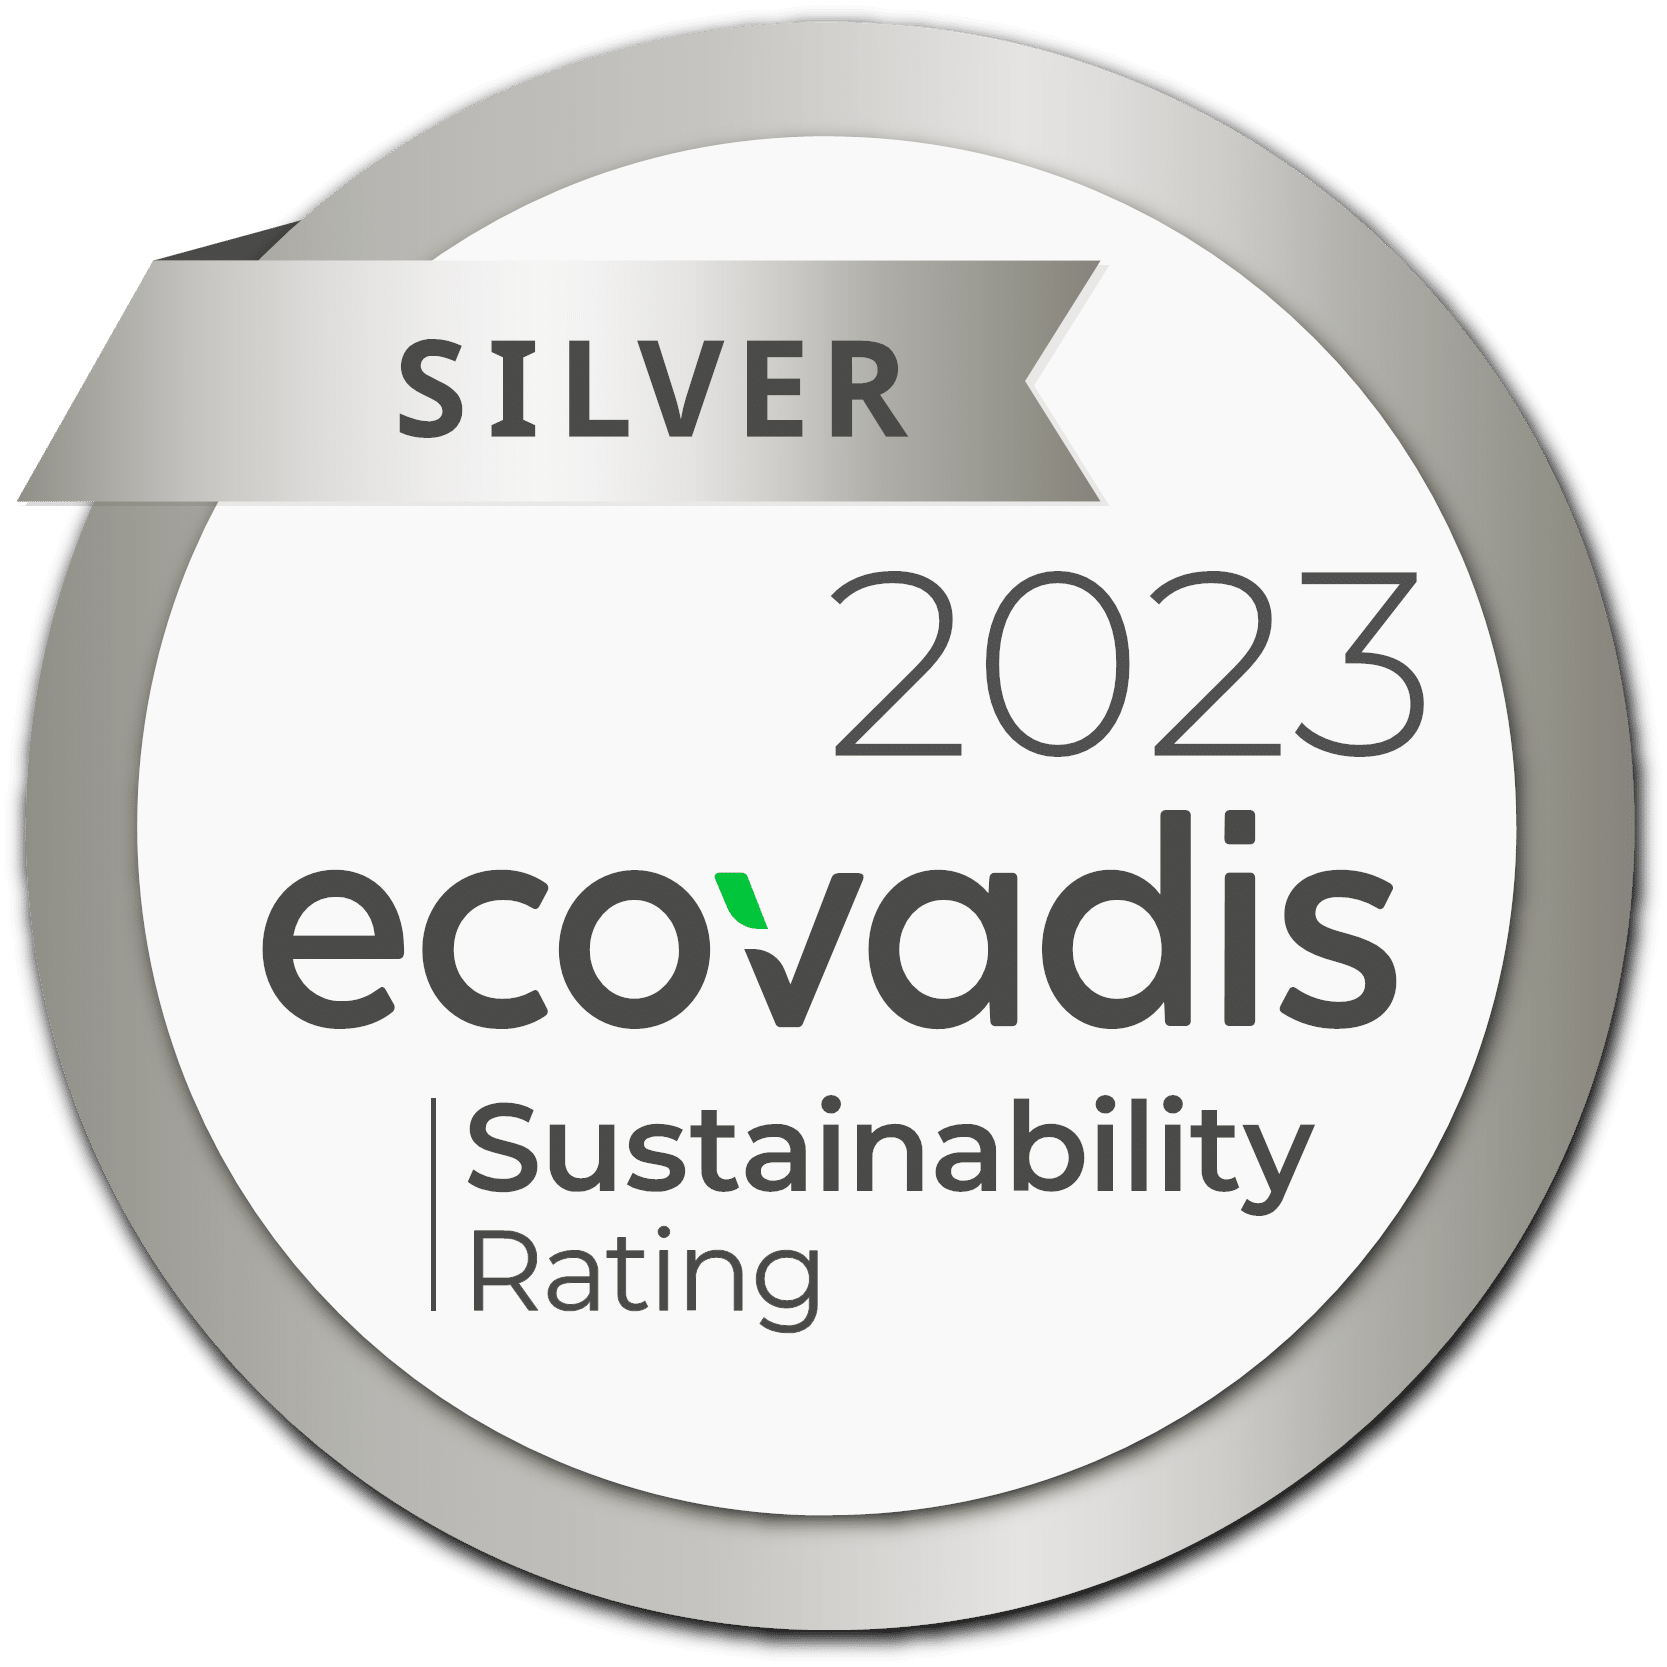 EcoVadis Silver medal 2023 - Sustainability Rating